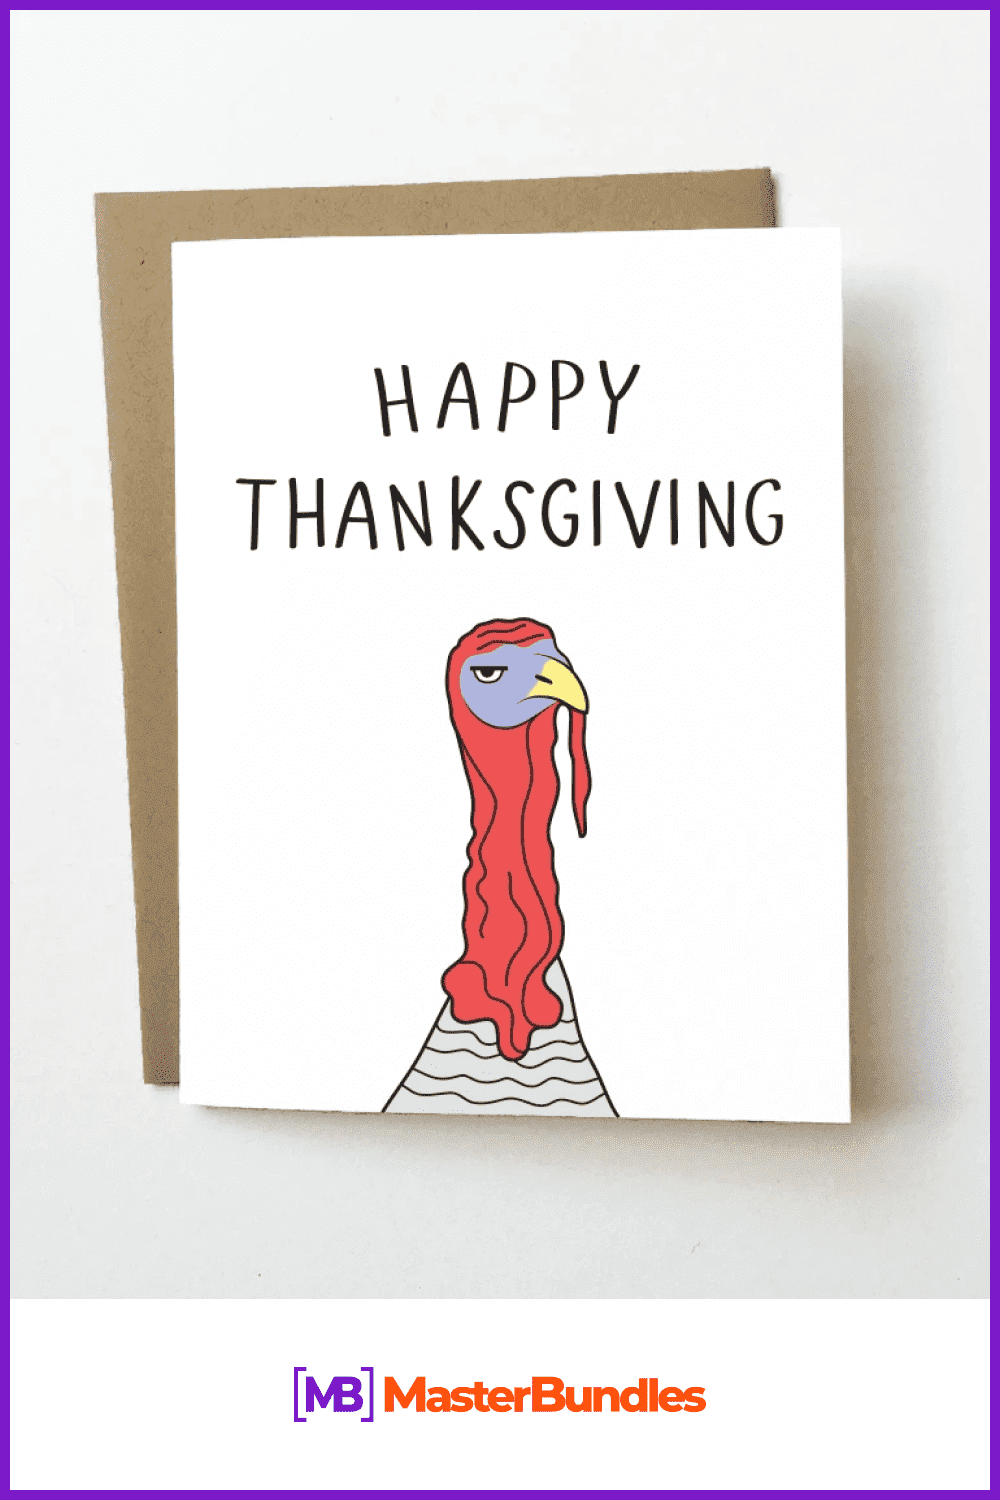 Angry turkey - Funny Thanksgiving card.